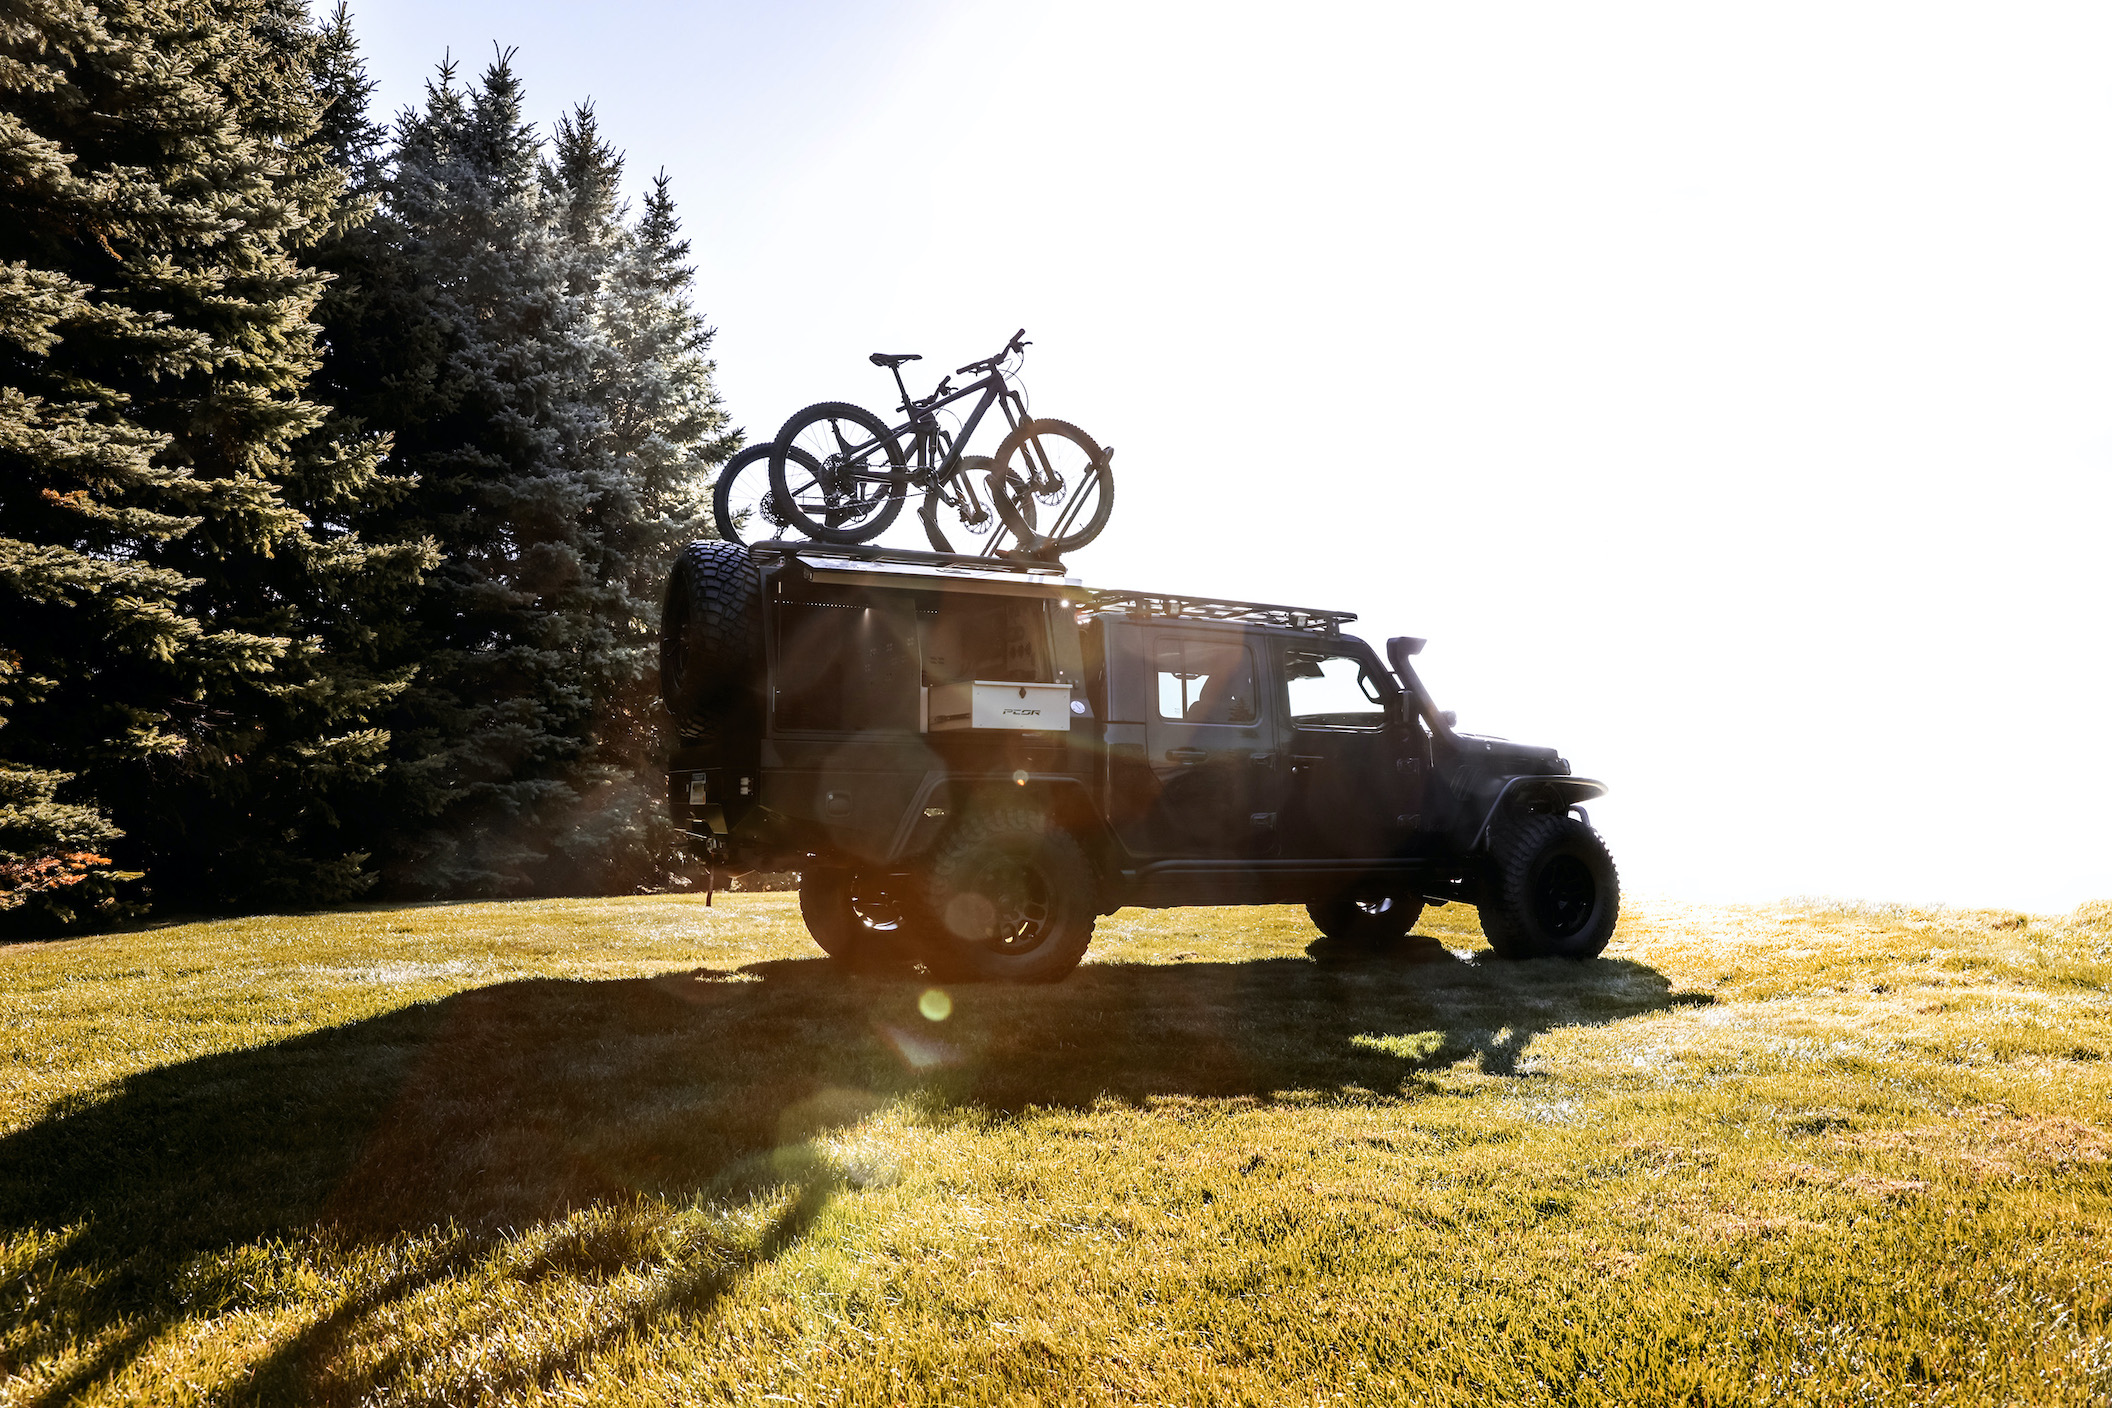 Using exclusive Jeep® Performance Parts (JPP) and custom accessories, Mopar designers transformed a 2020 Jeep® Gladiator into a fun concept vehicle for serious mountain bikers - the Jeep Gladiator Top Dog Concept.